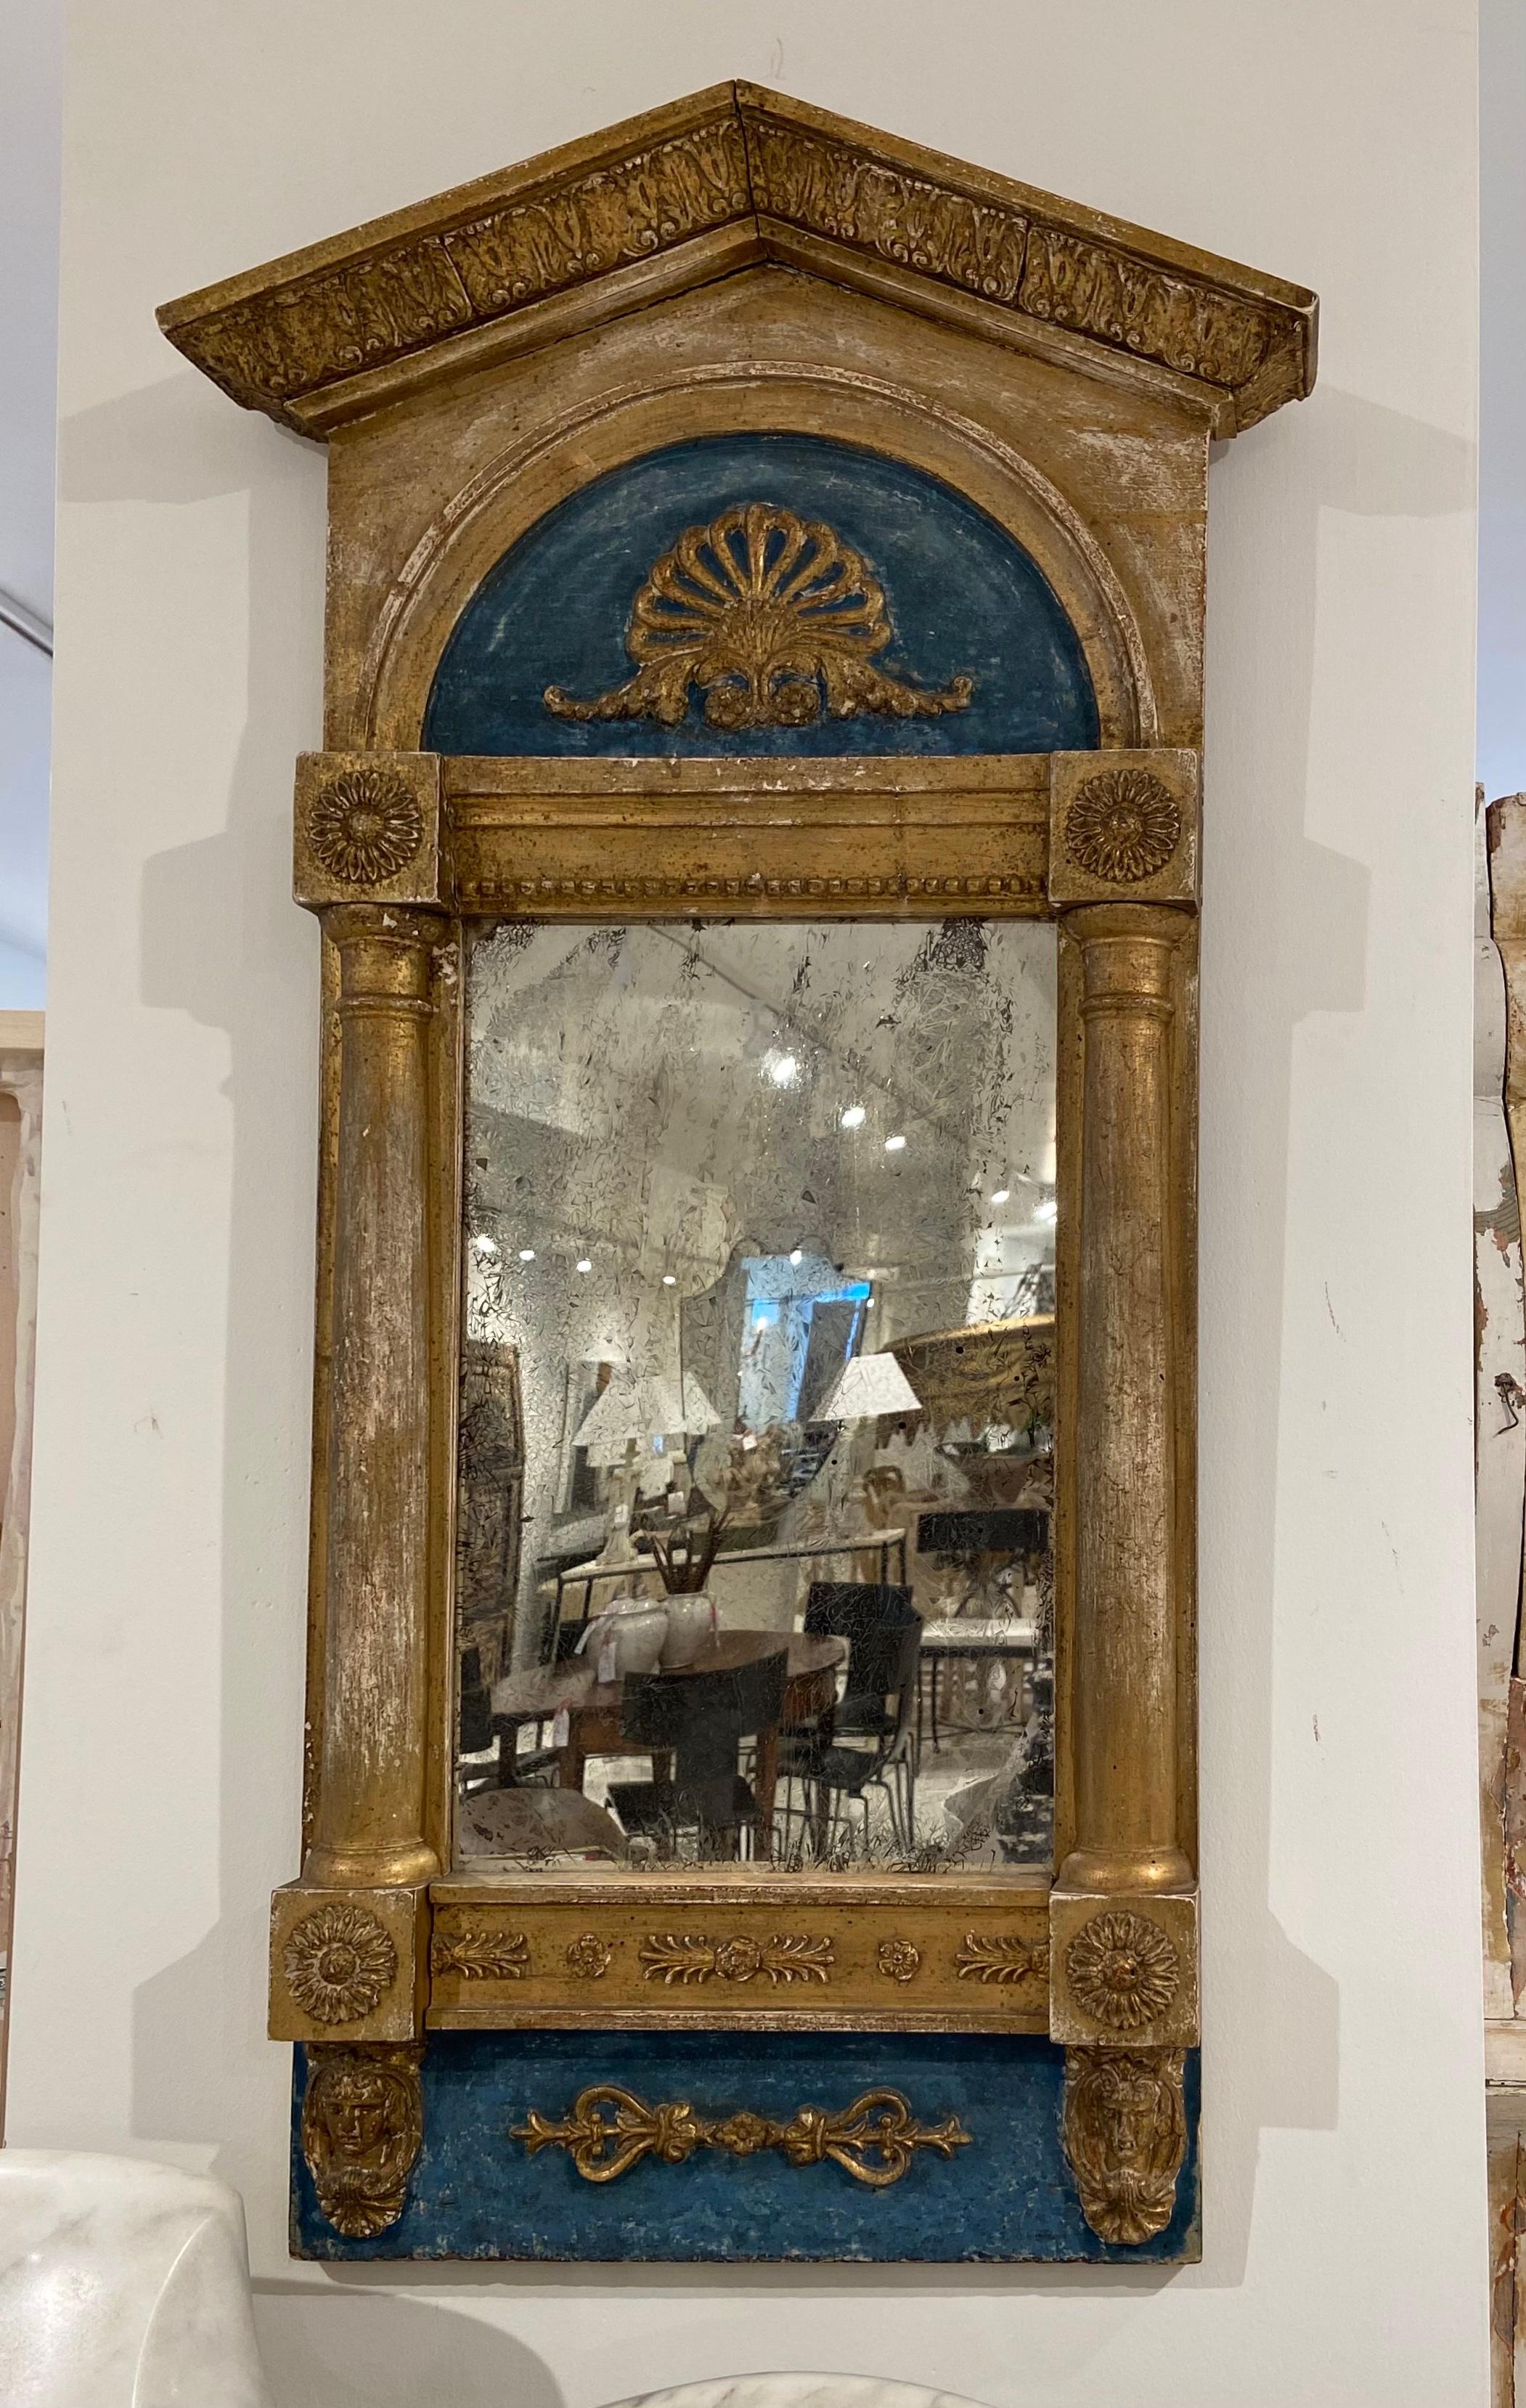 This antique Swedish mirror is from the 1830s. It is painted turquoise and gold with neoclassical carvings. 